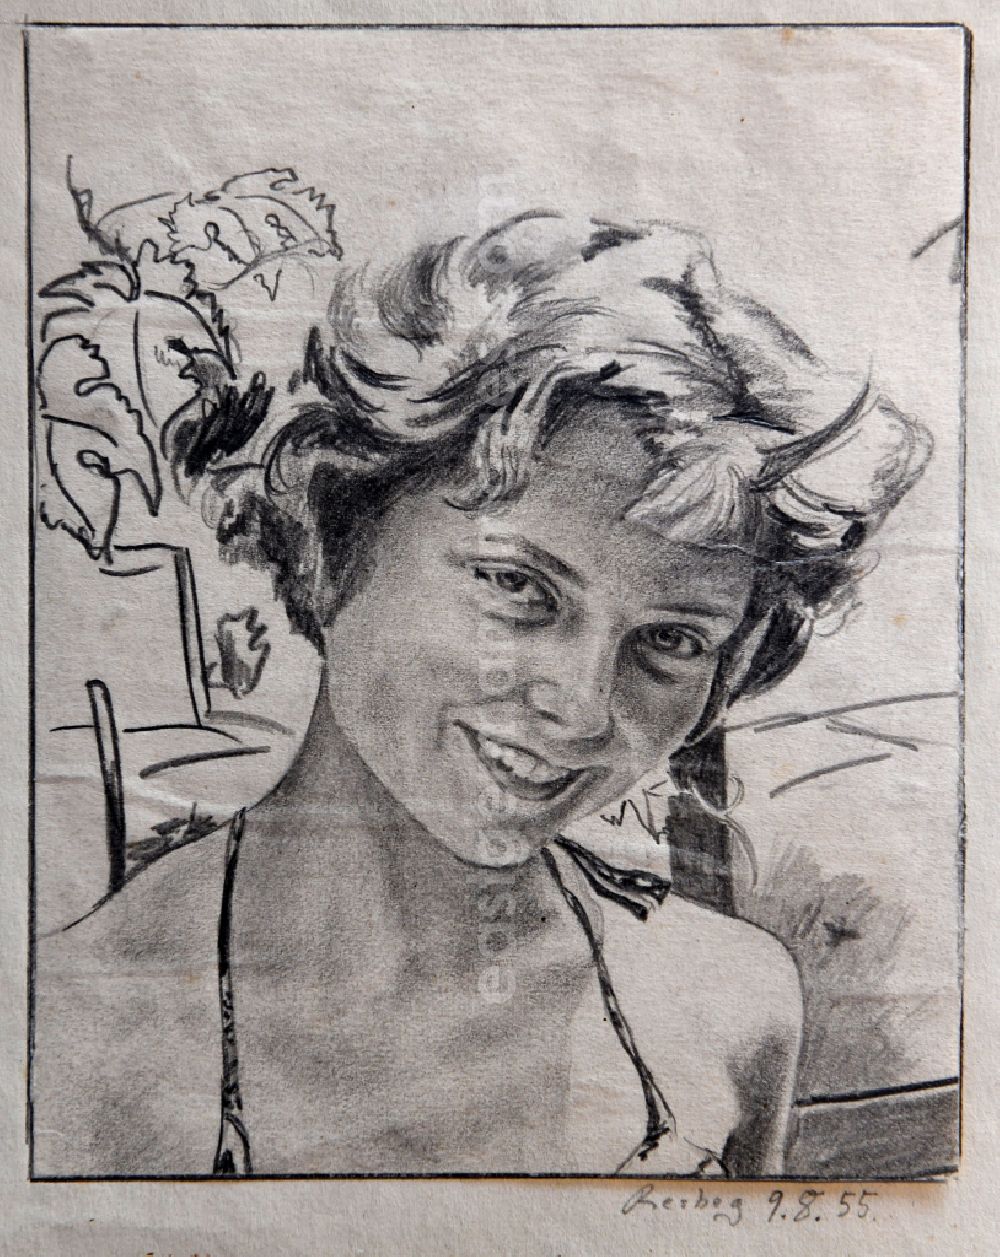 GDR picture archive: Prerow - VG picture free work: pencil drawing girl portrait by the artist Siegfried Gebser in Prerow in the state Mecklenburg-Western Pomerania on the territory of the former GDR, German Democratic Republic